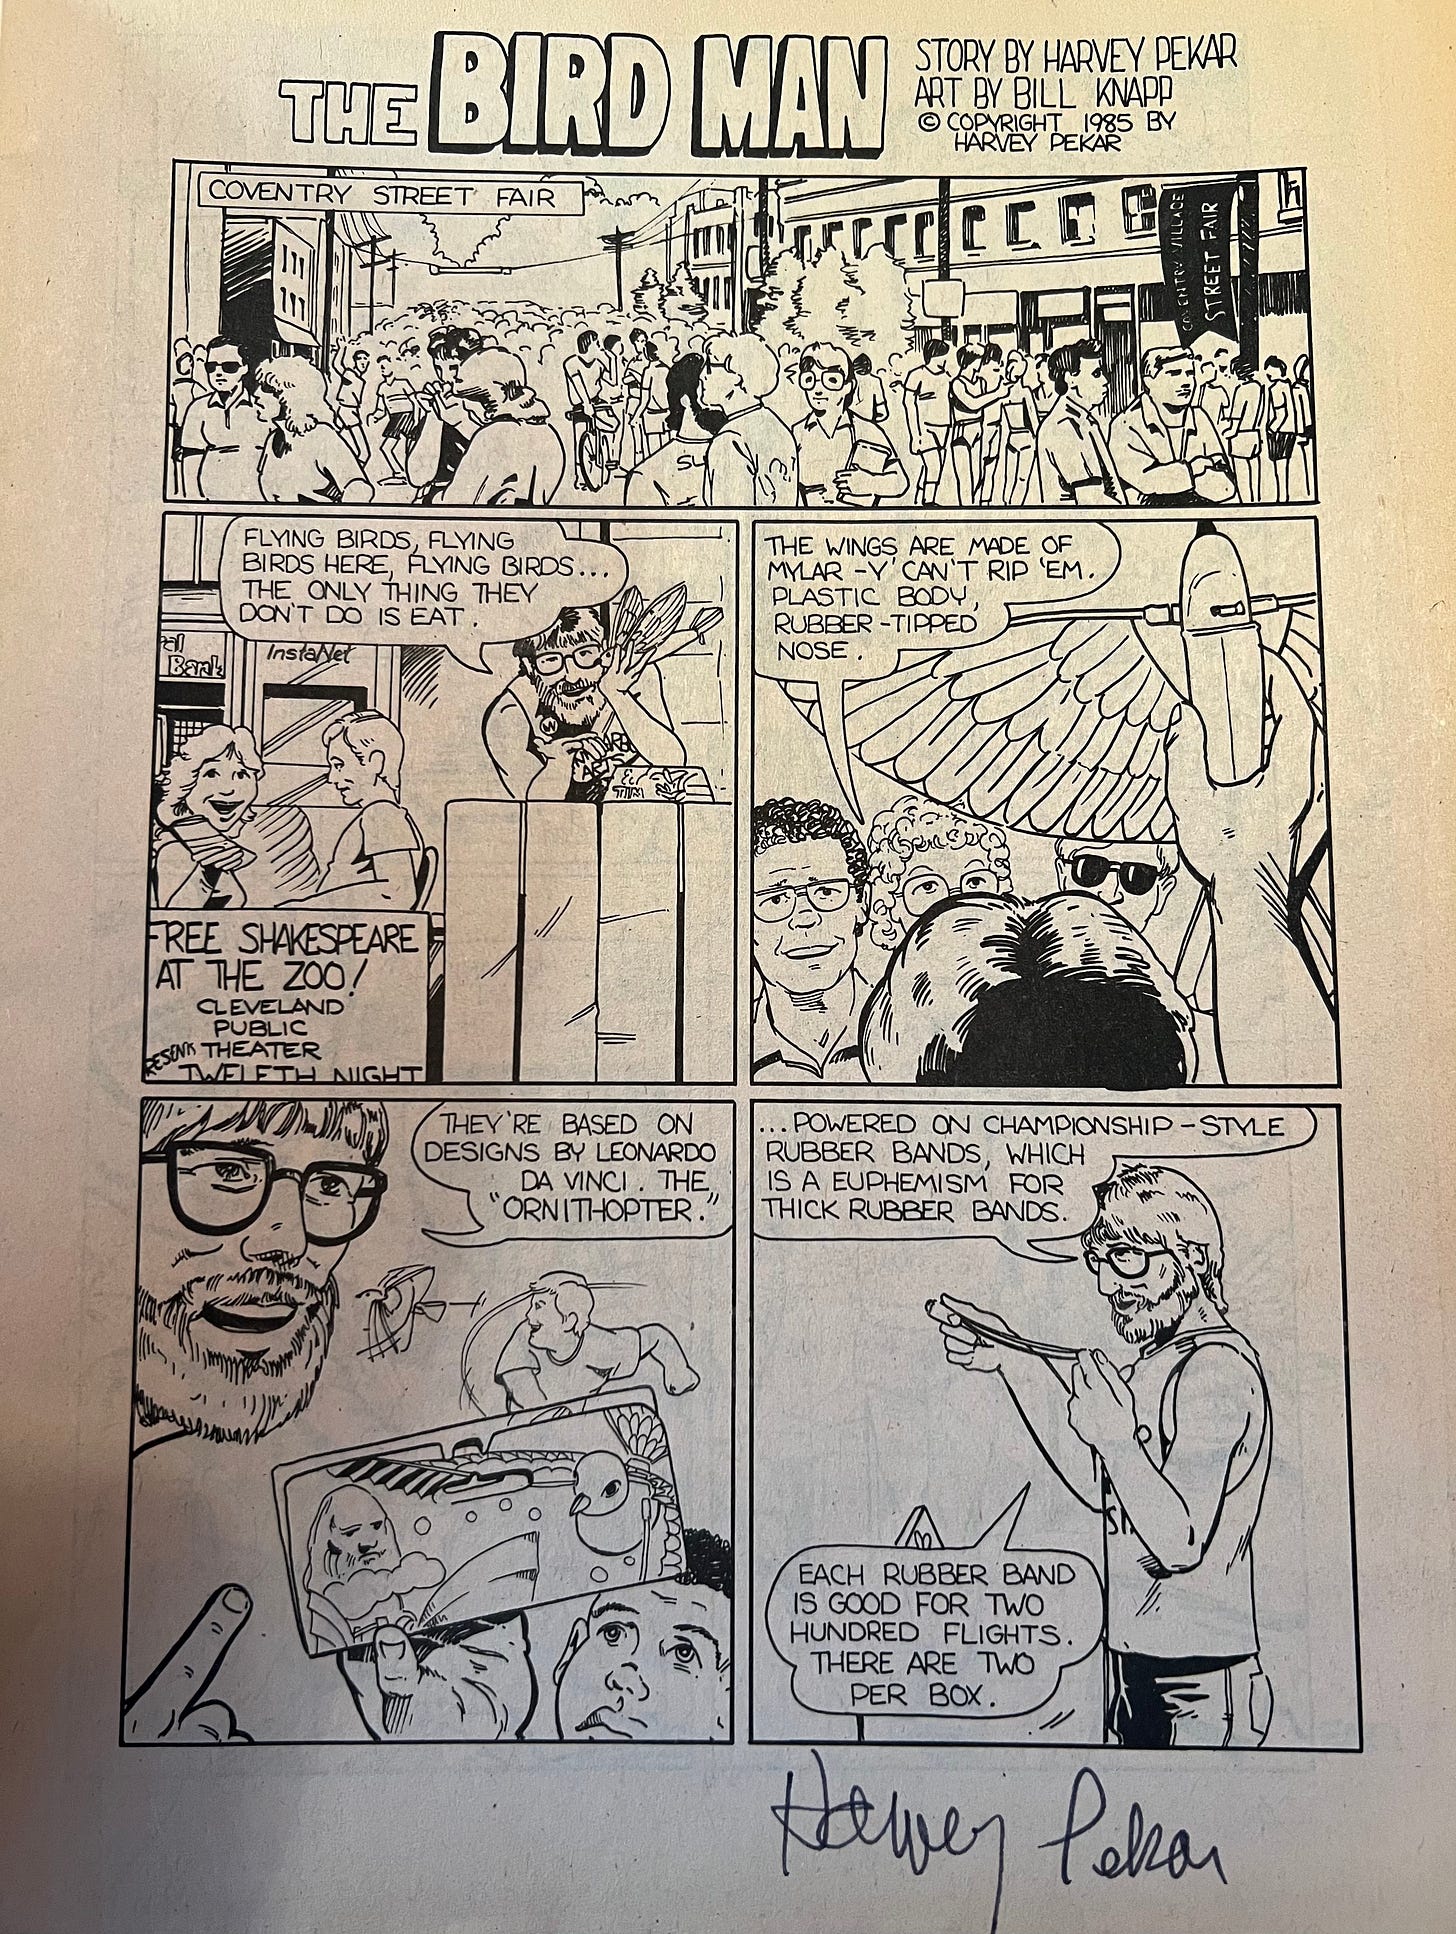 A one page, black and white comic titled The Bird Man, signed at the bottom by the writer, Harvey Pekar